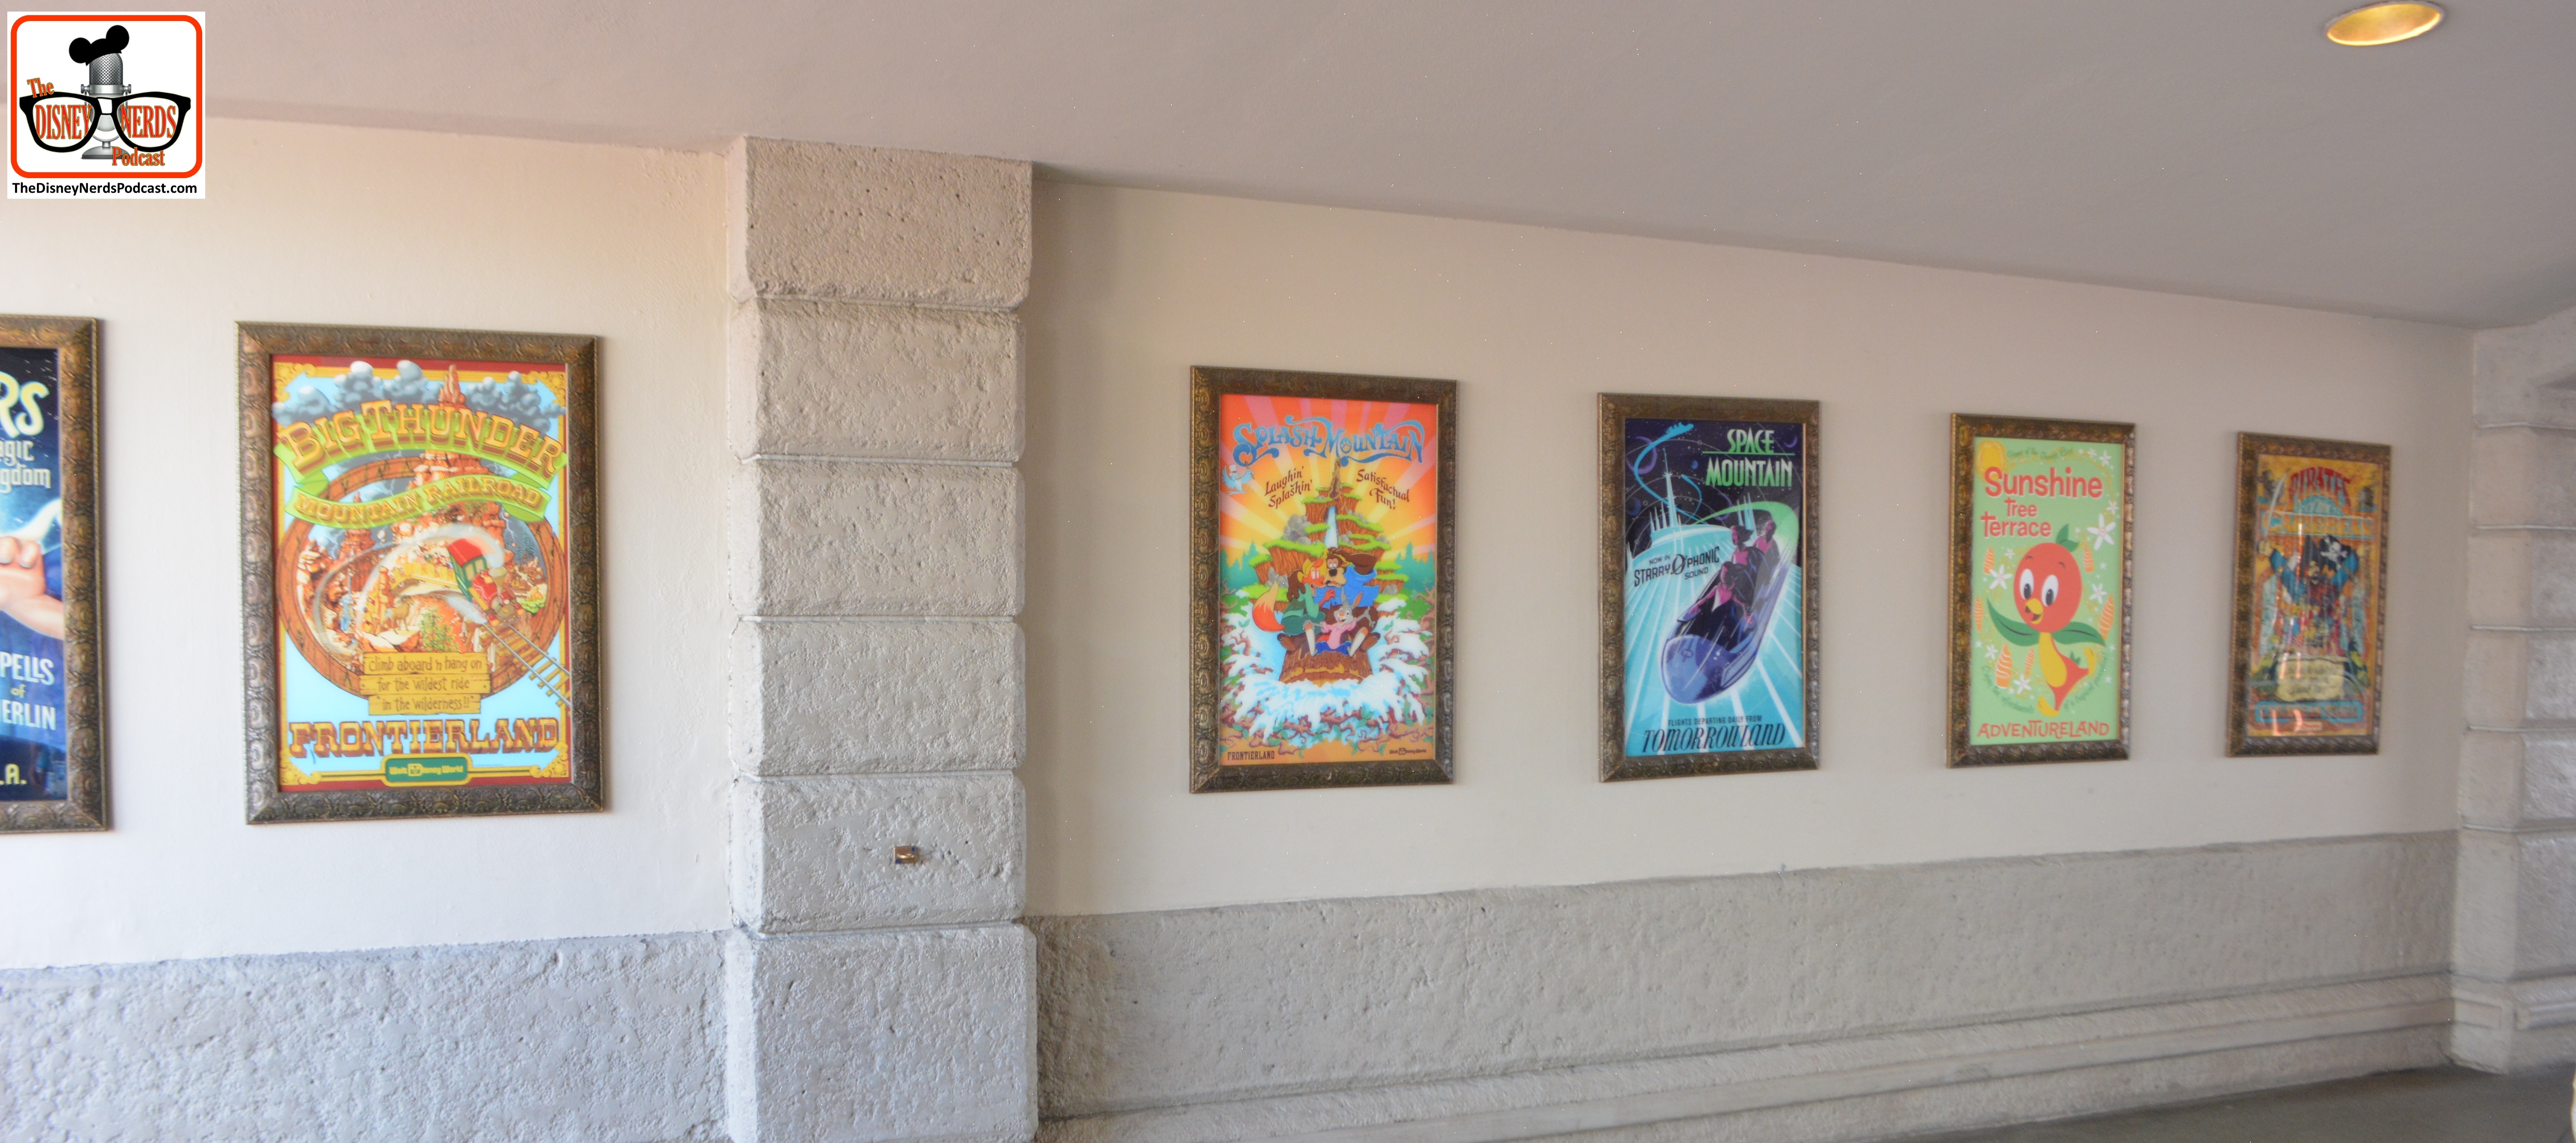 Wait... what happened to all the maps under the attraction posters?